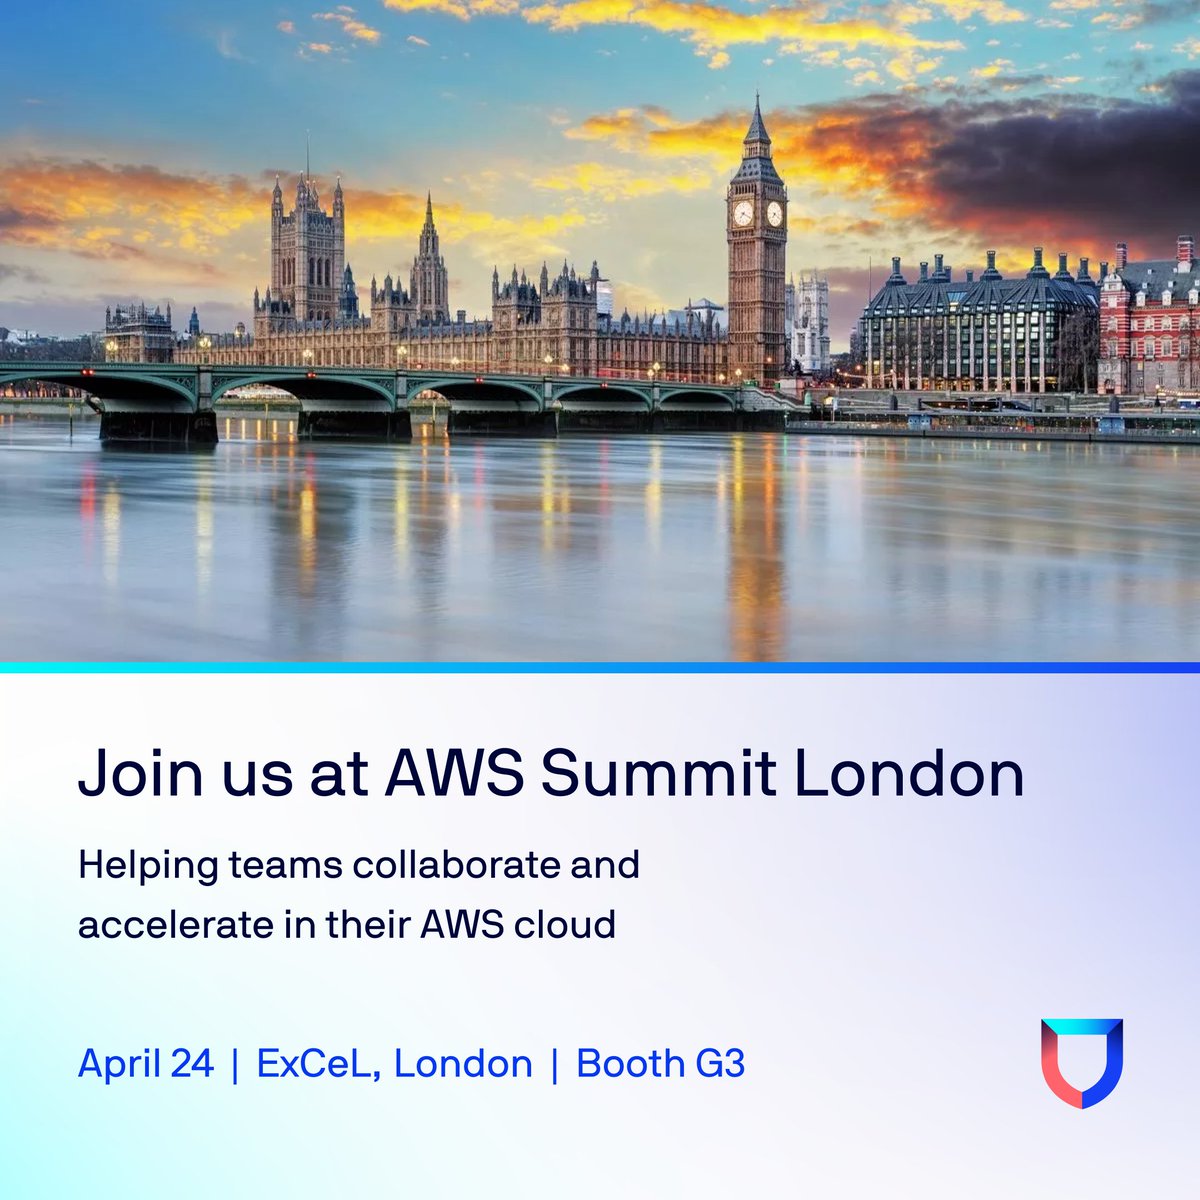 Planning to attend #AWSSummit London? Stop by booth G3 to see how Lacework and @awscloud can help you go further, faster in your cloud. Book a meeting with us: okt.to/Q5axhC @AWS_Partners